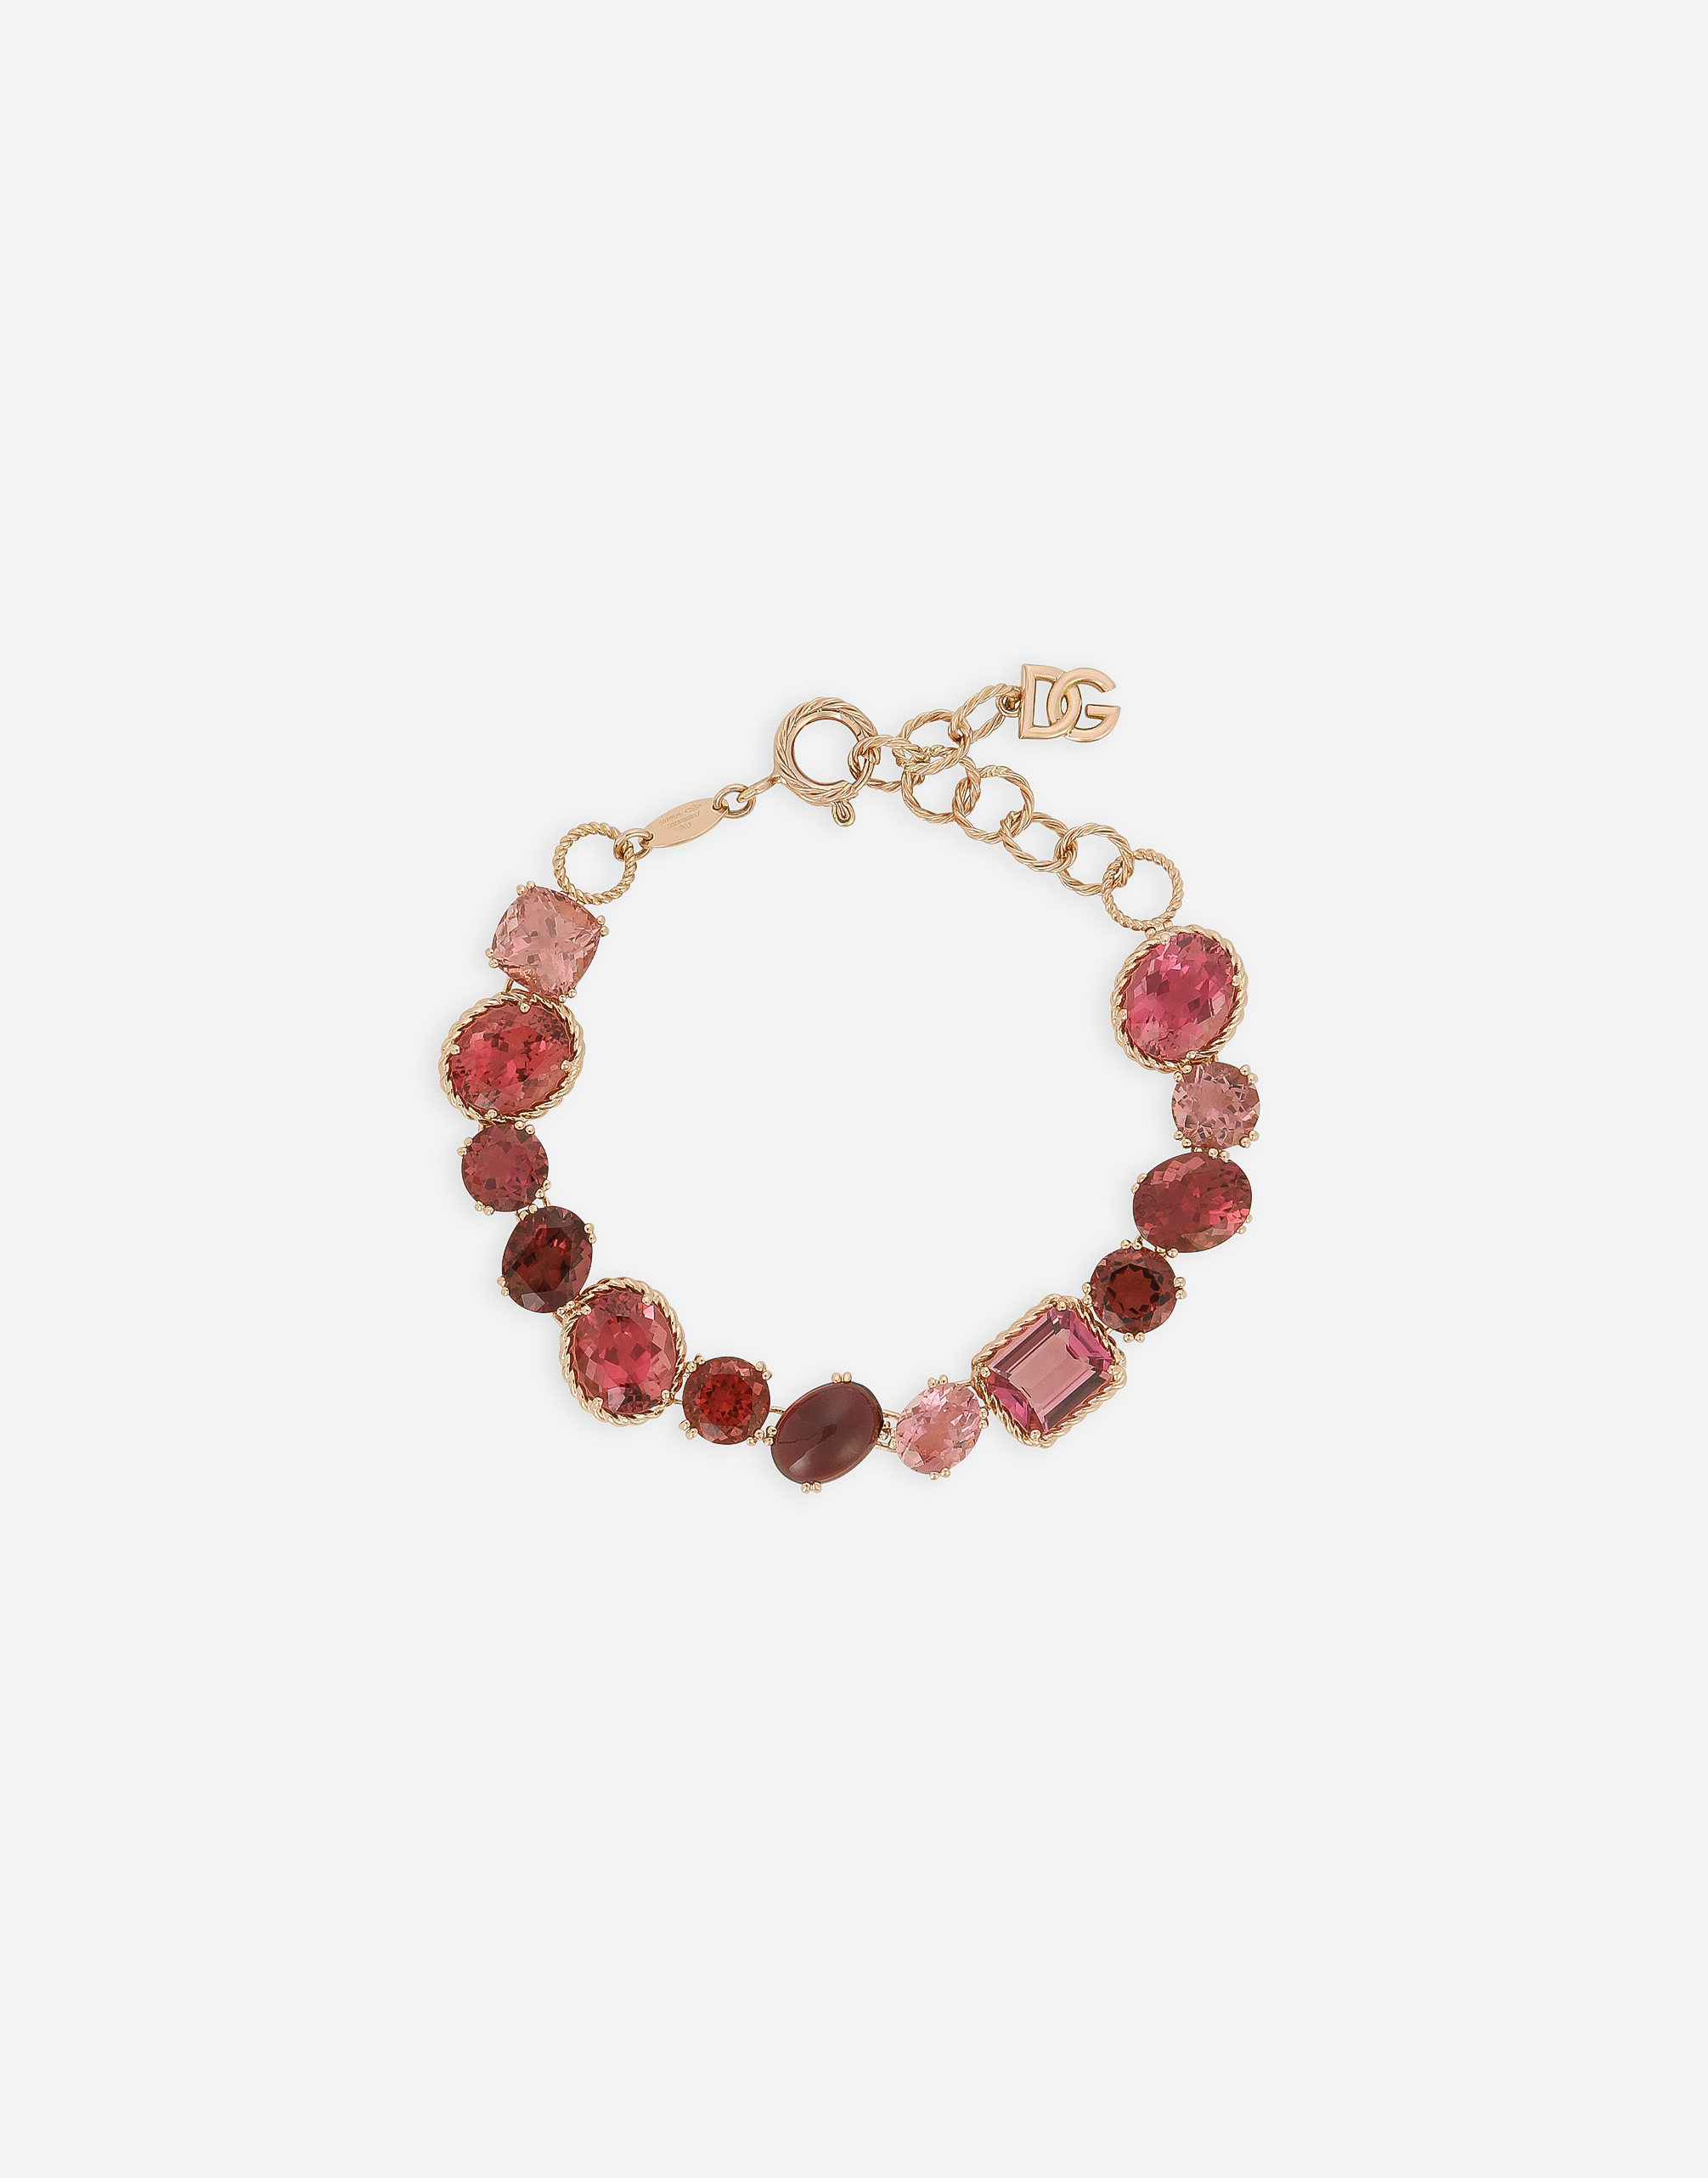 Dolce & Gabbana Anna Bracelet In Red Gold 18kt With Toumalines In Multi